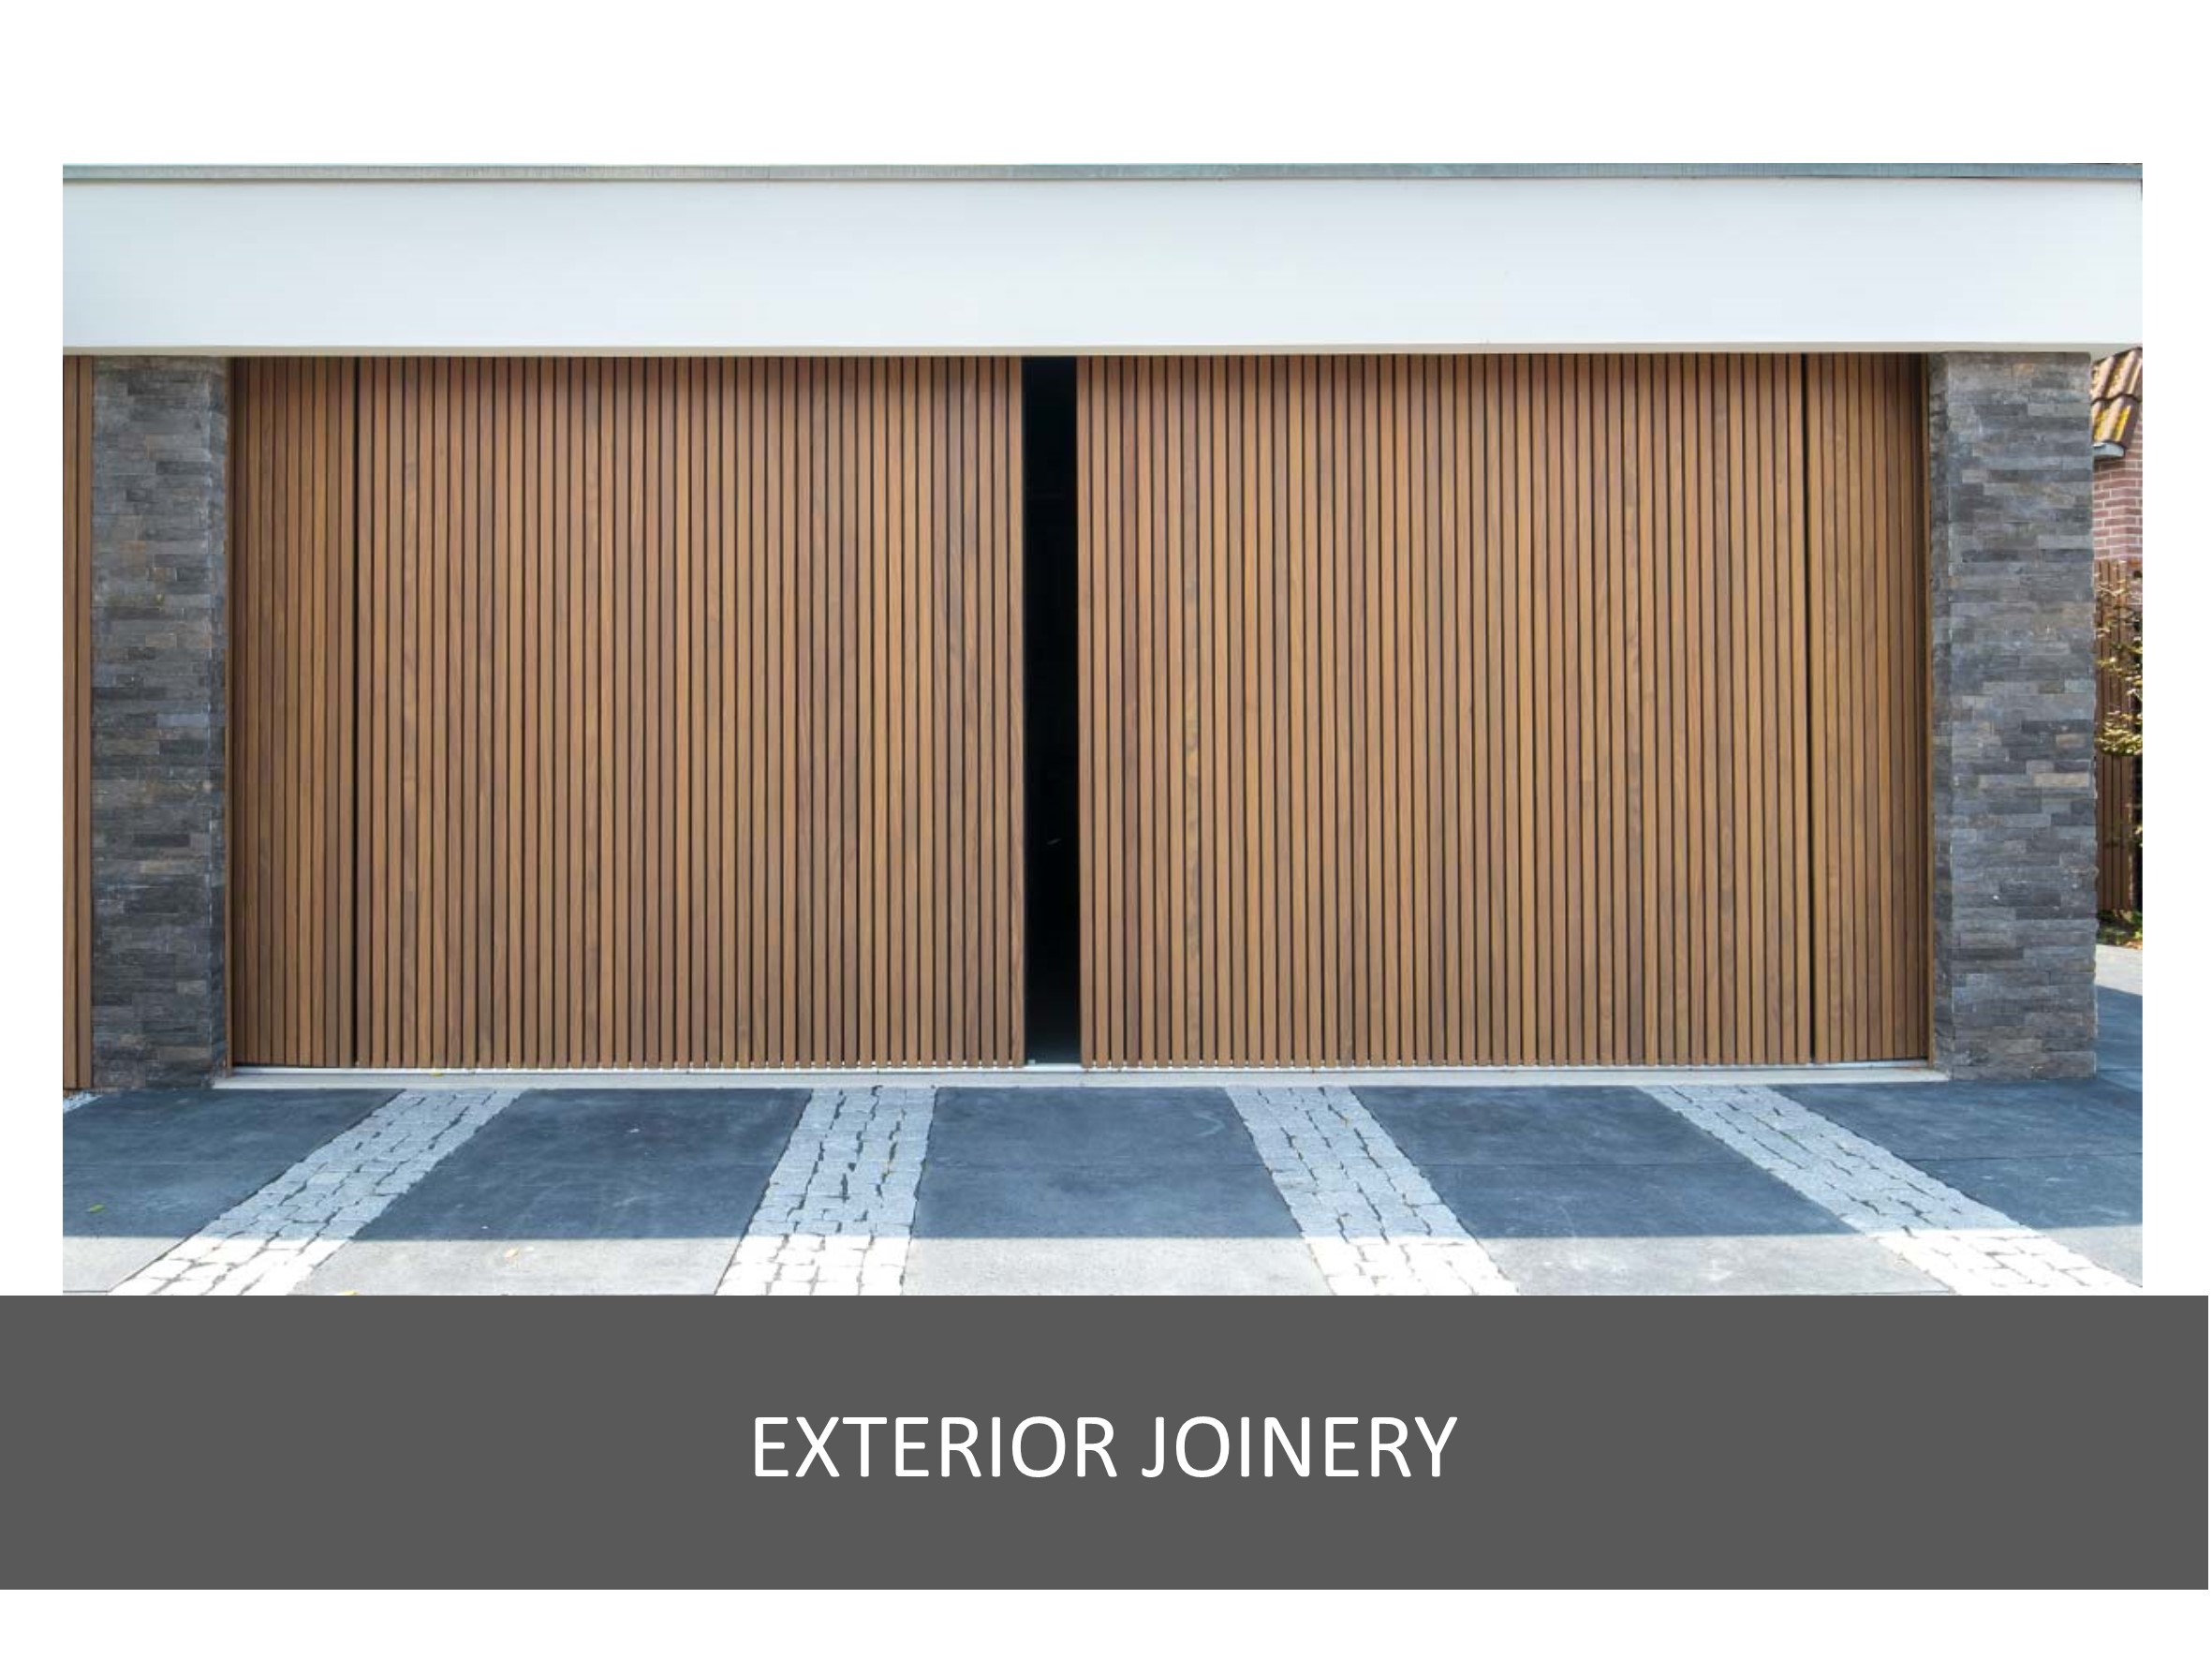 Exterior joinery